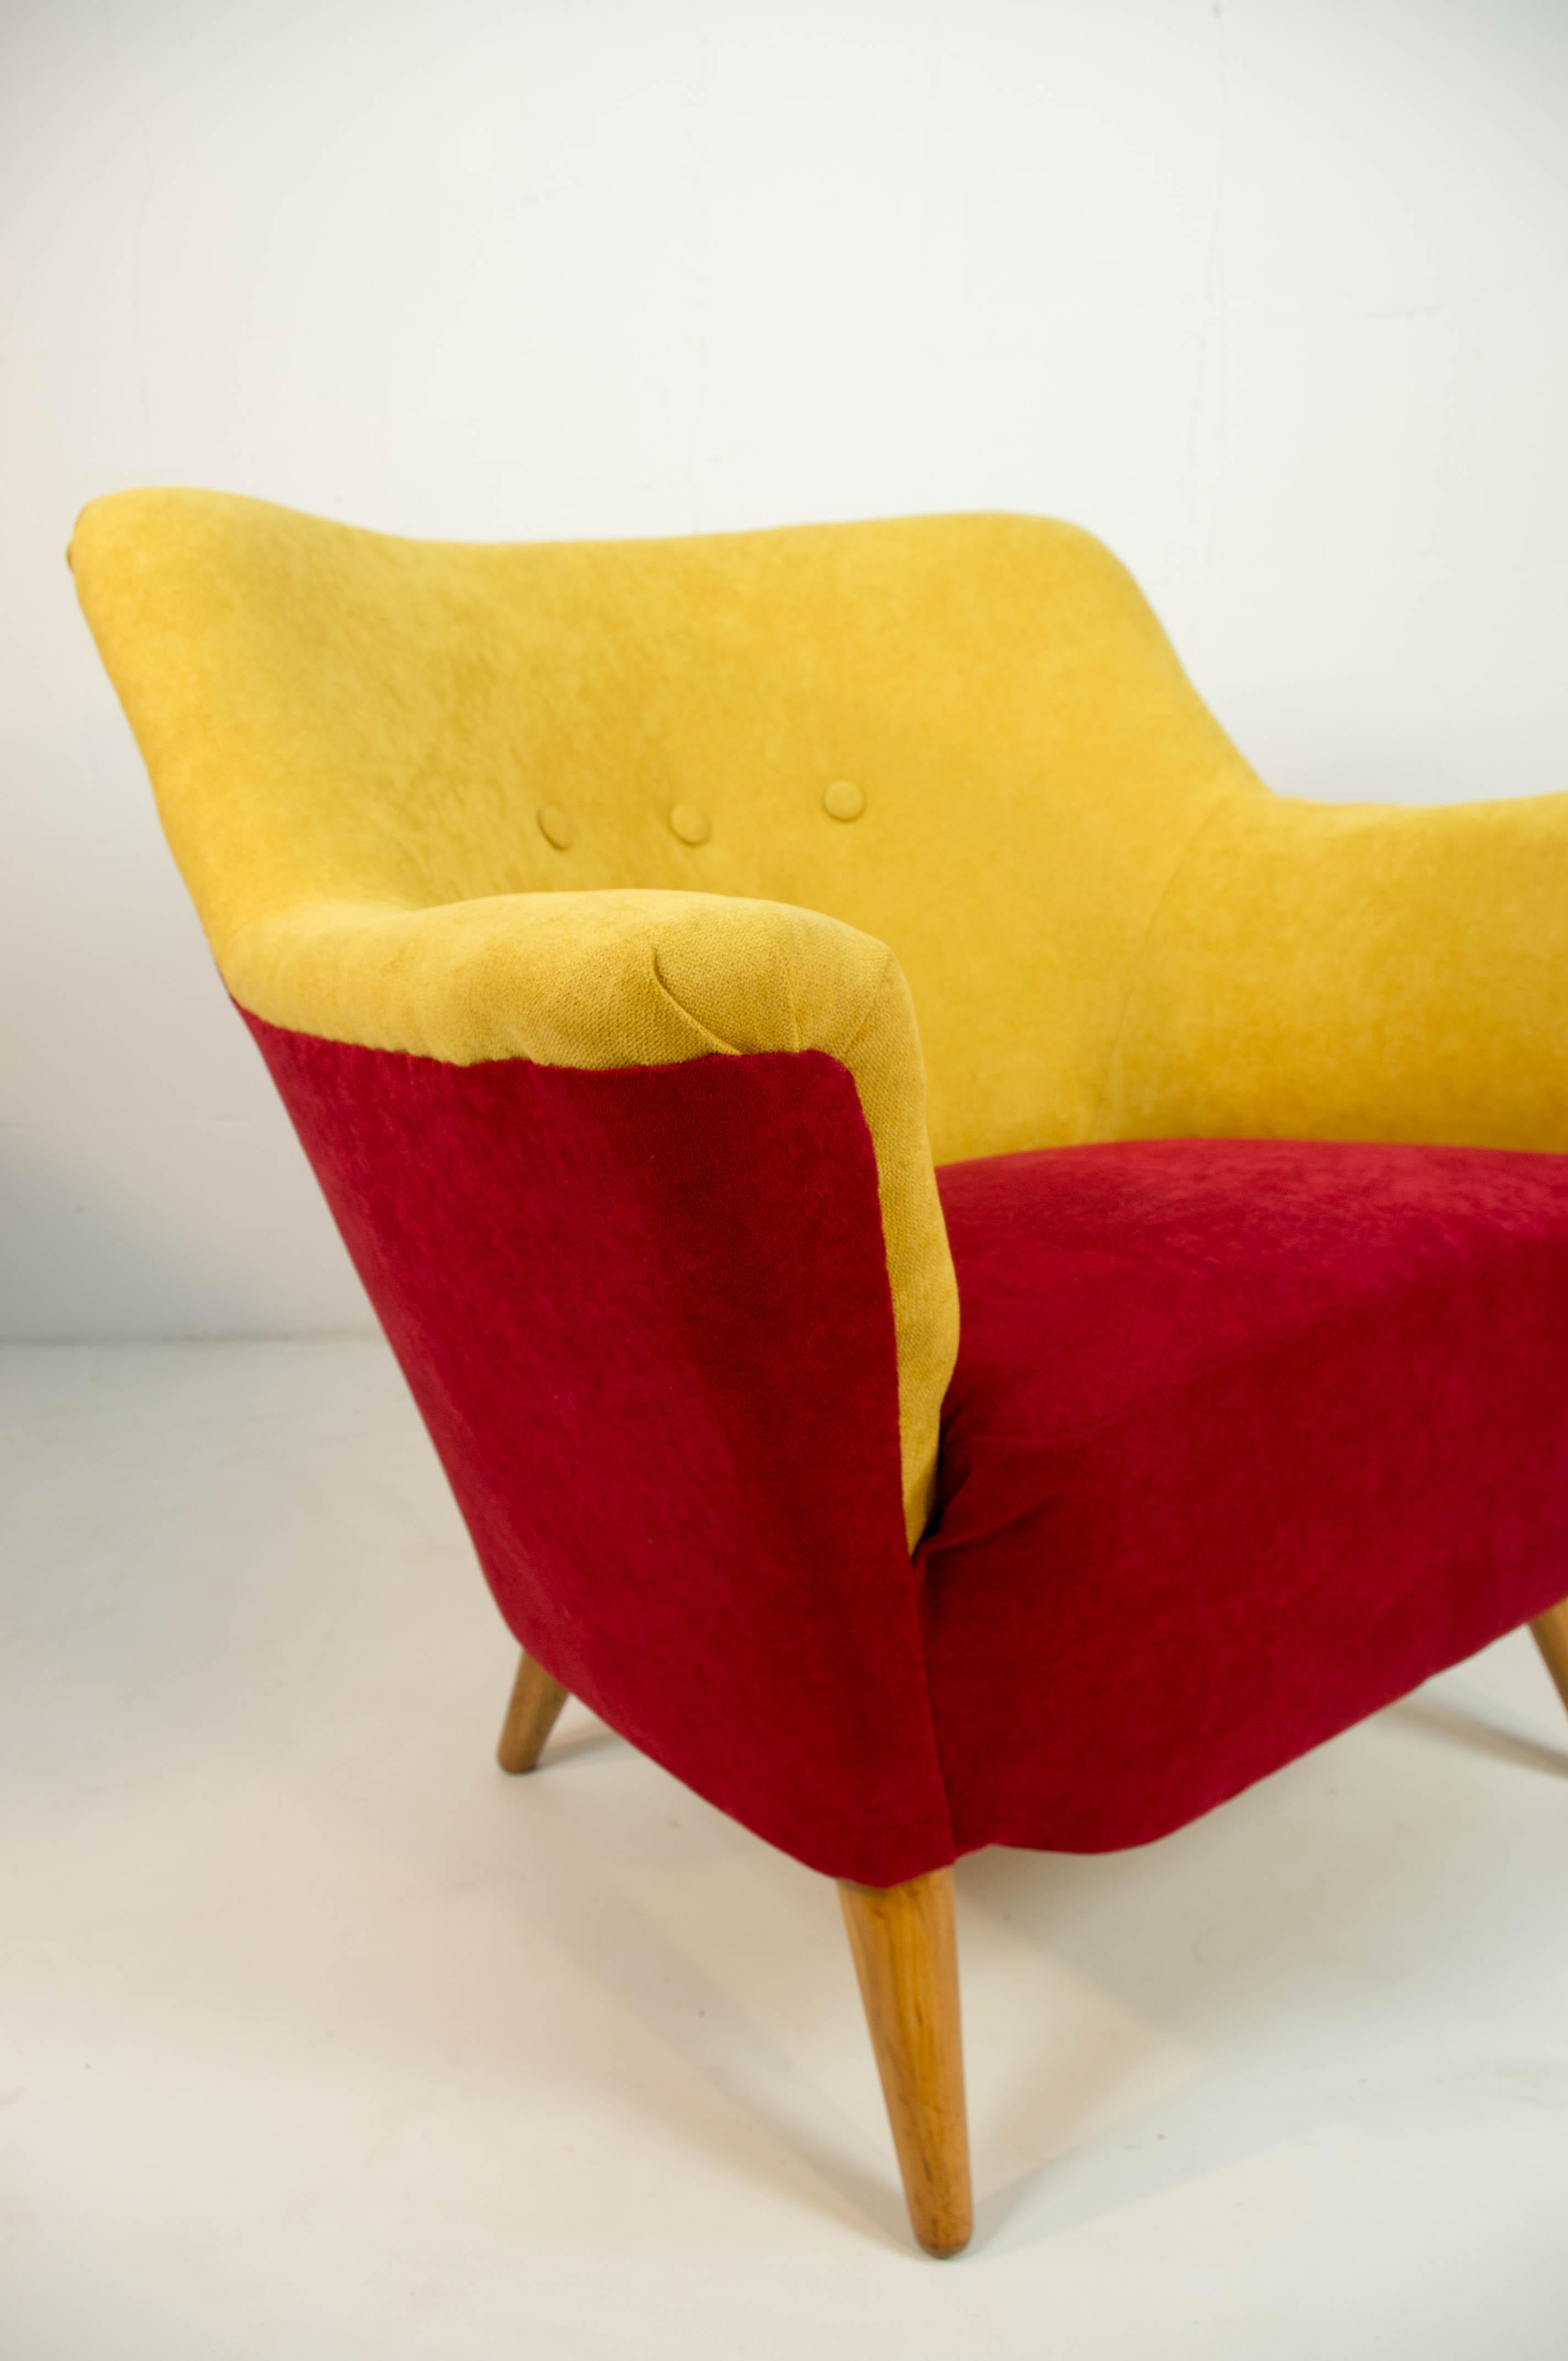 Beech Club Armchair in Red and Yellow, 1930 For Sale